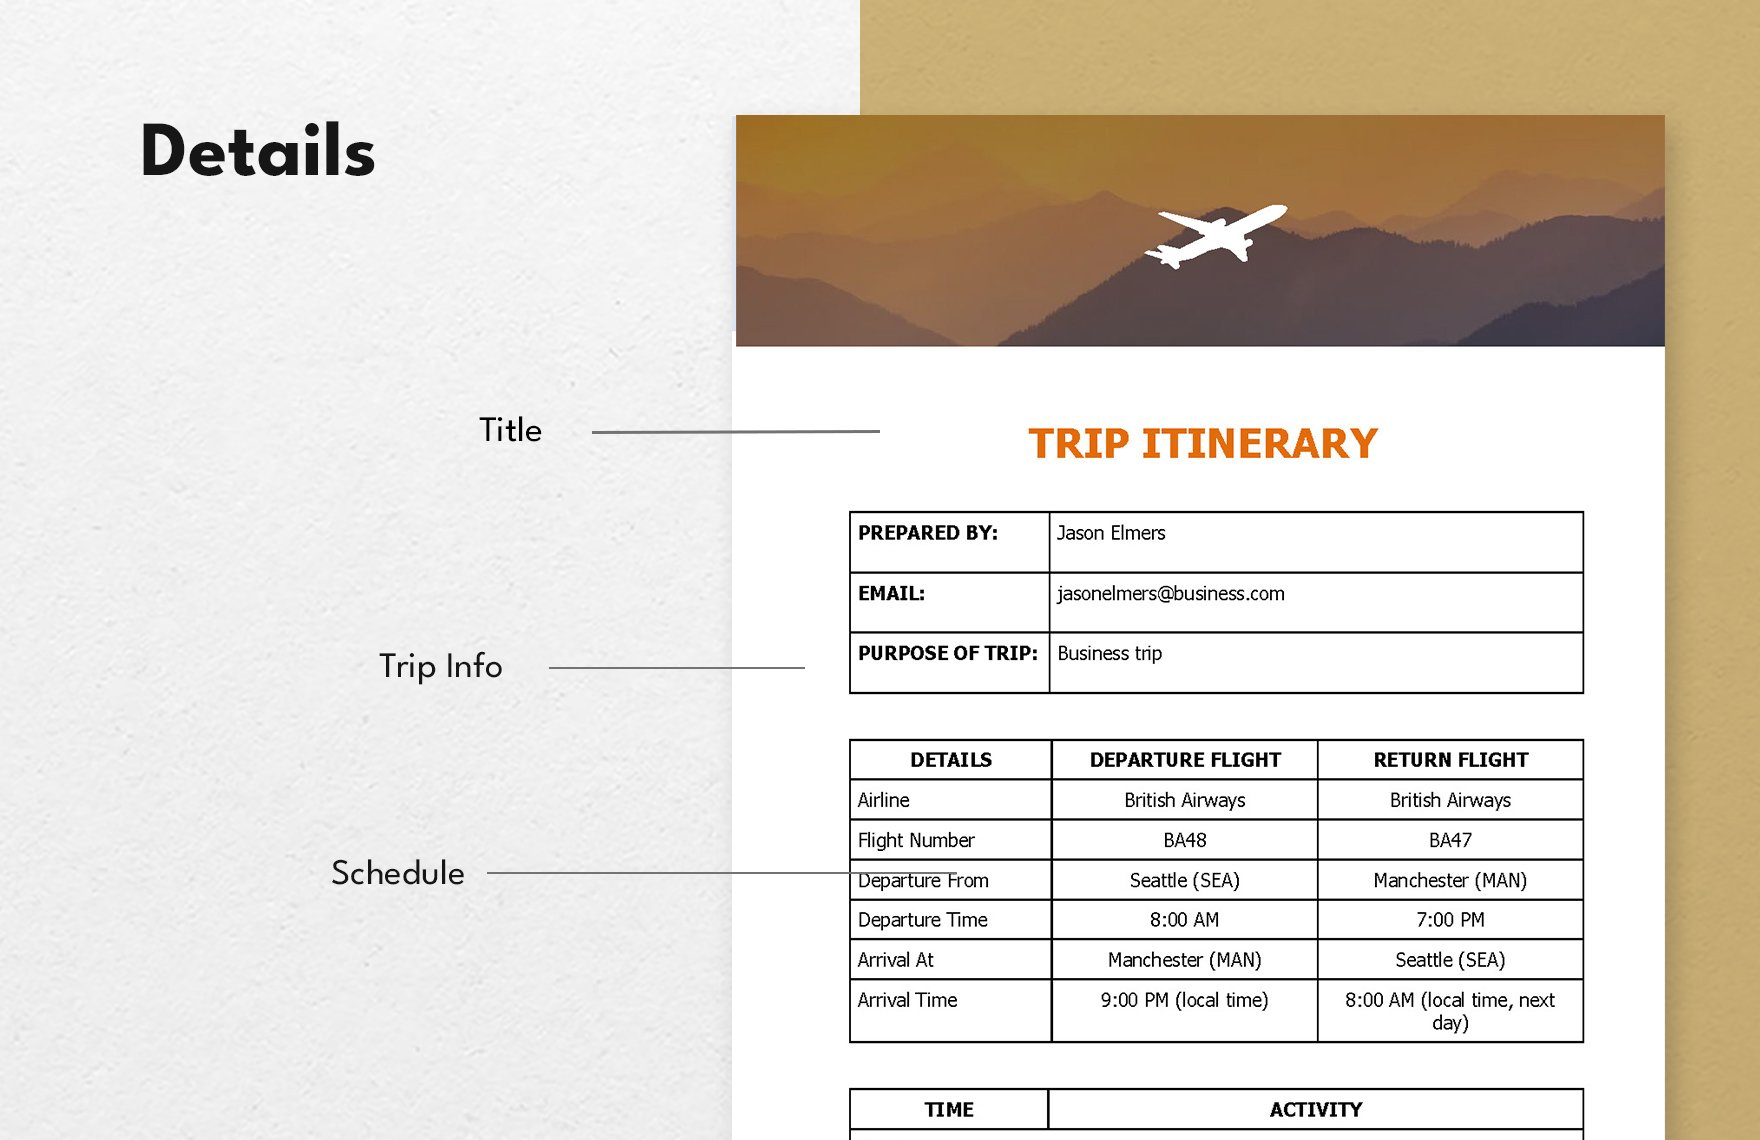 Trip Itinerary Template